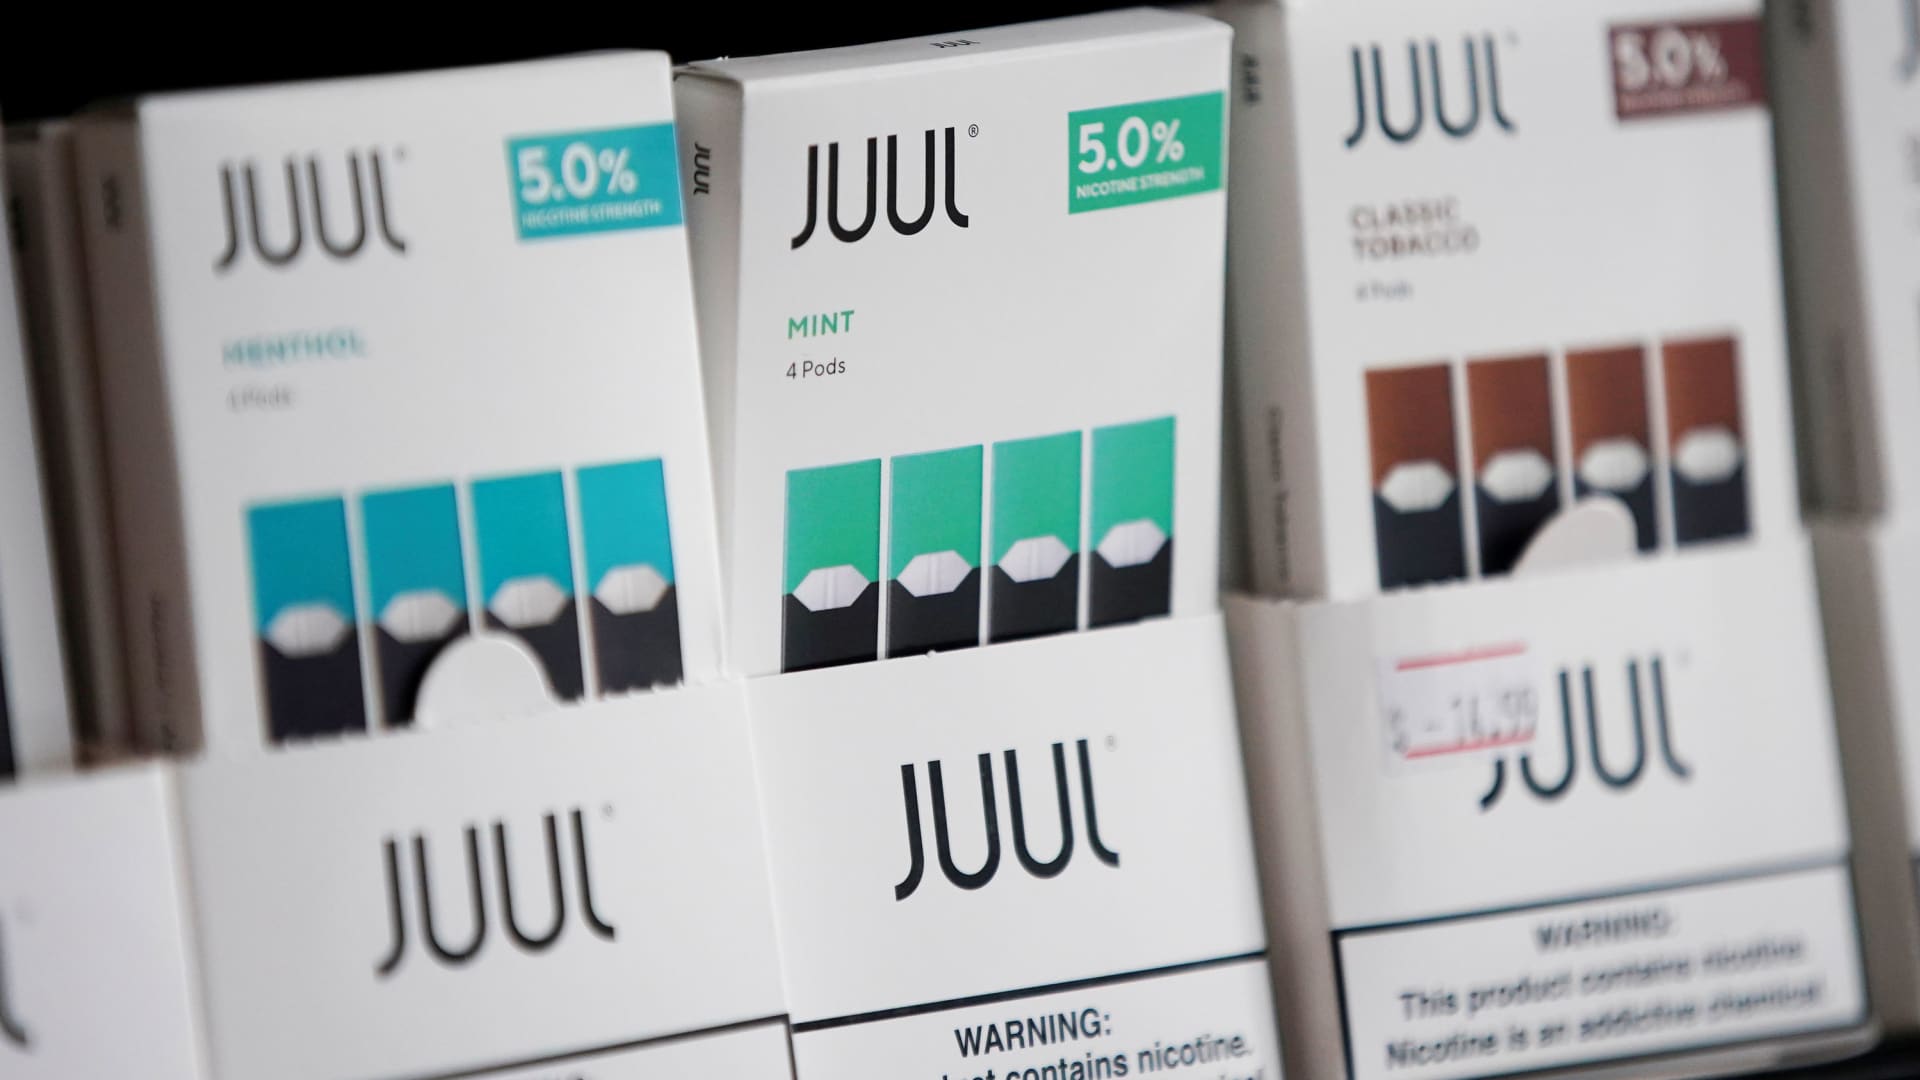 Juul is asking the court to temporarily block the FDA’s ban on e-cigarettes